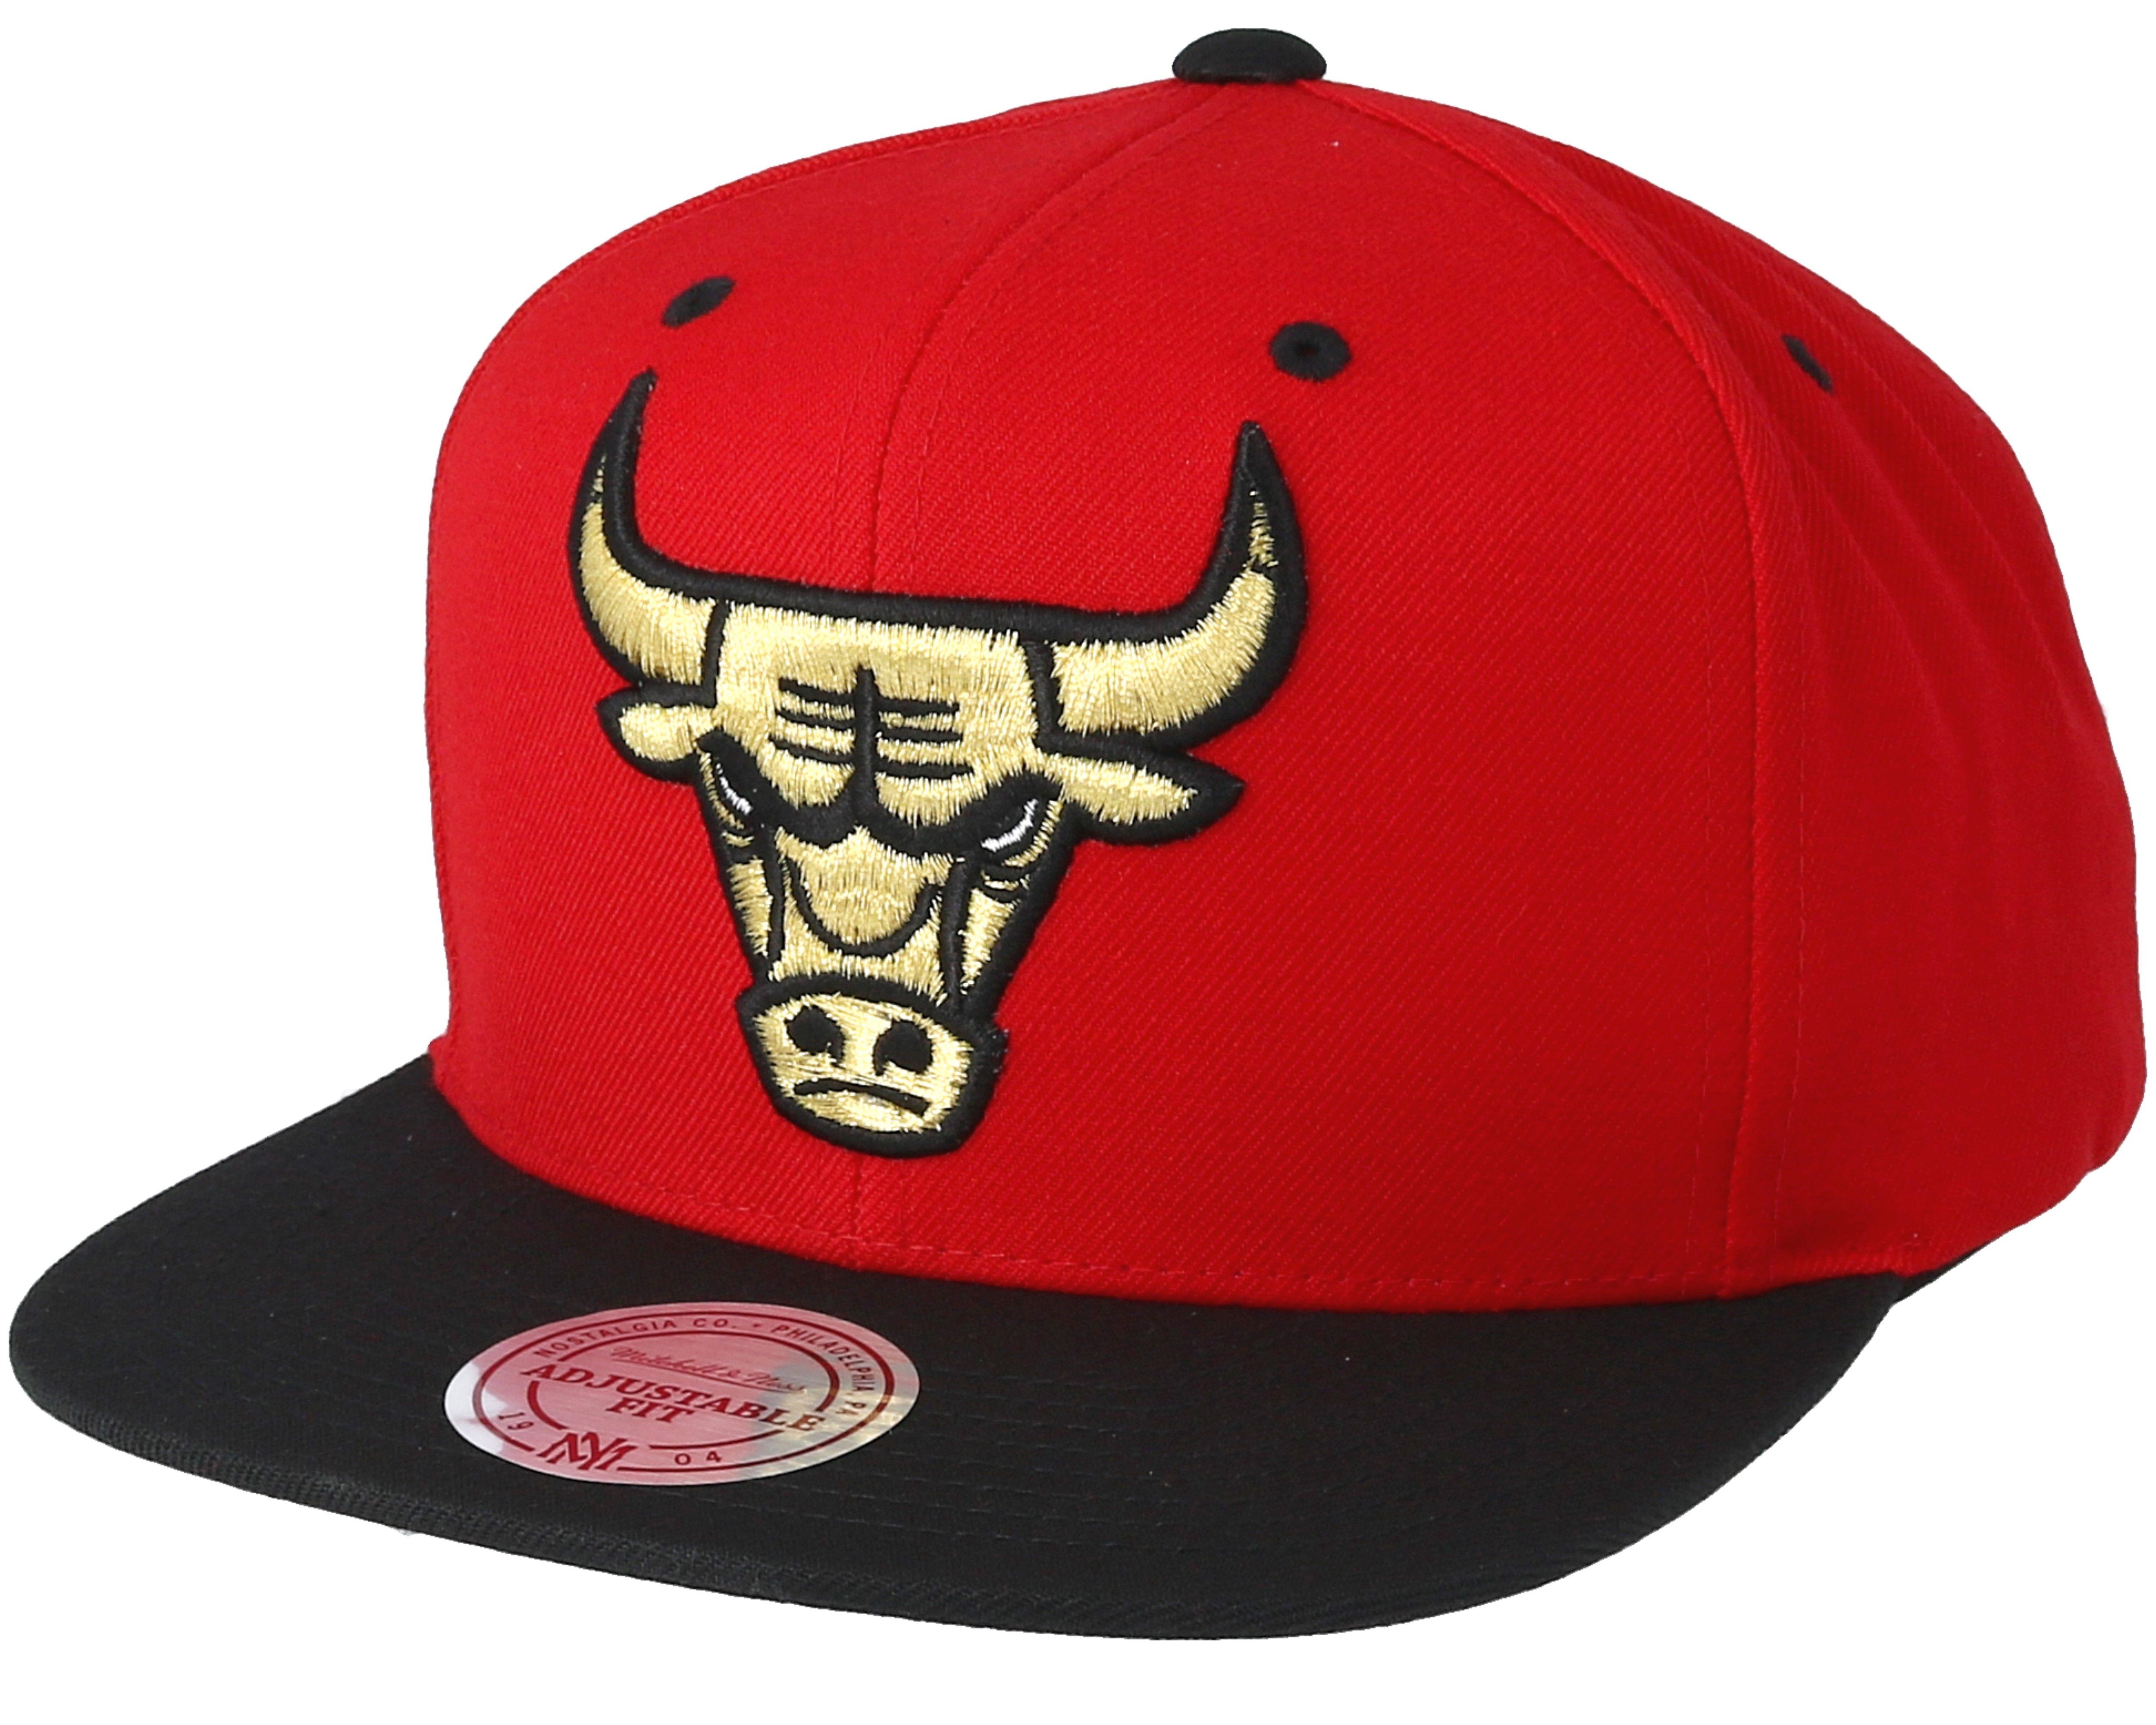 Red Black and Gold Logo - Chicago Bulls Black & Gold Metallic Red Snapback - Mitchell & Ness ...